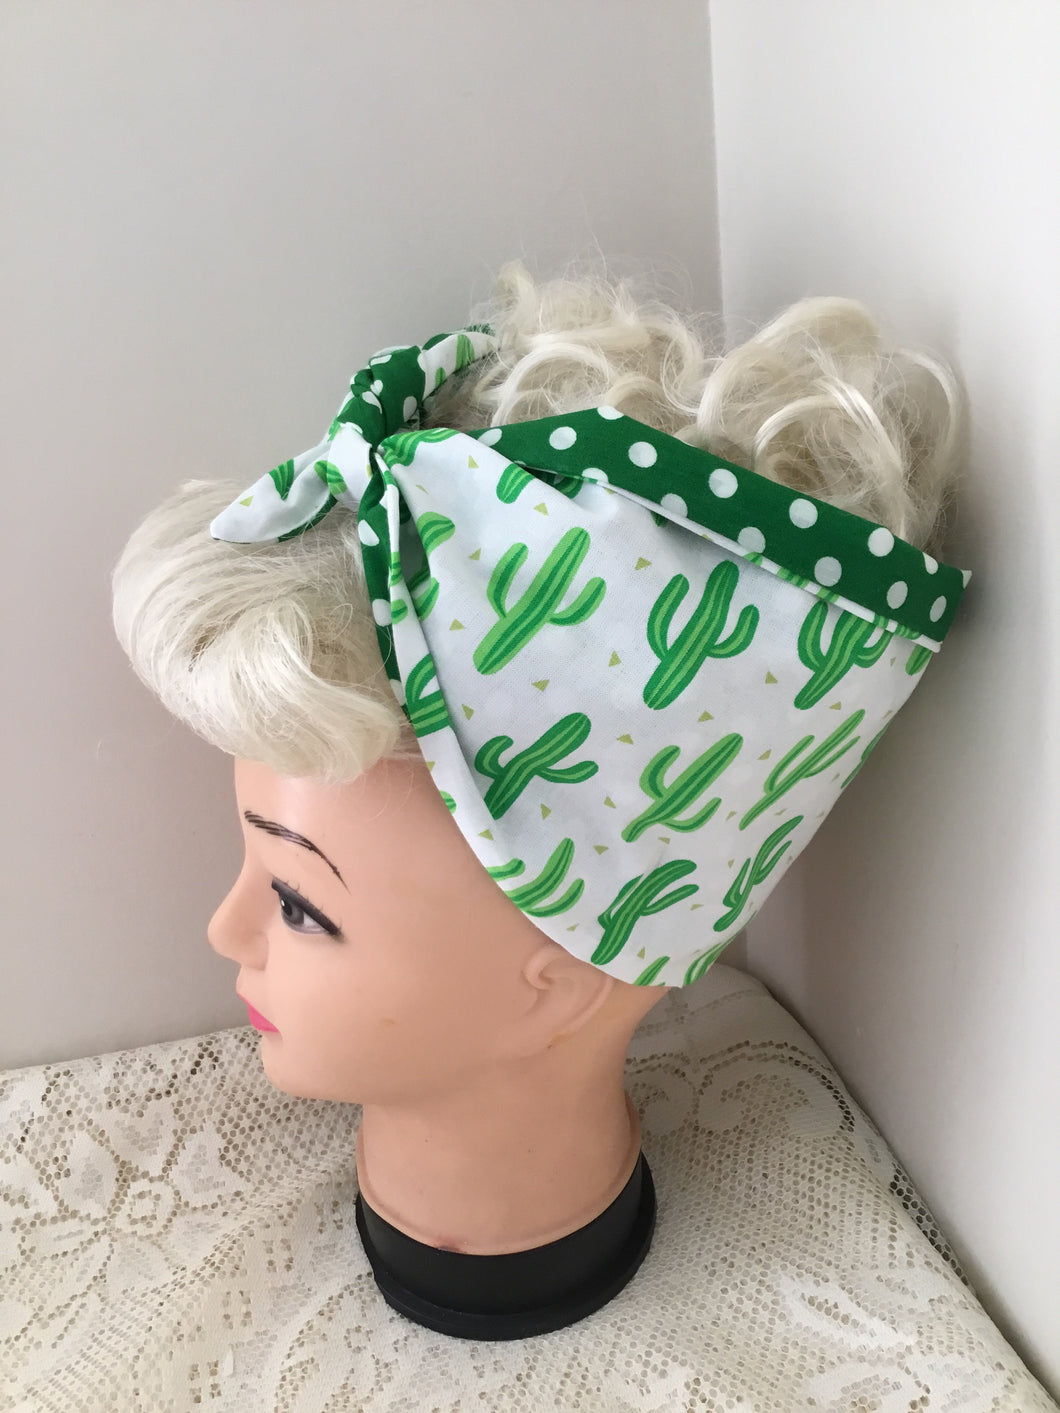 GREEN CACTUS 🌵 - vintage inspired do-rags